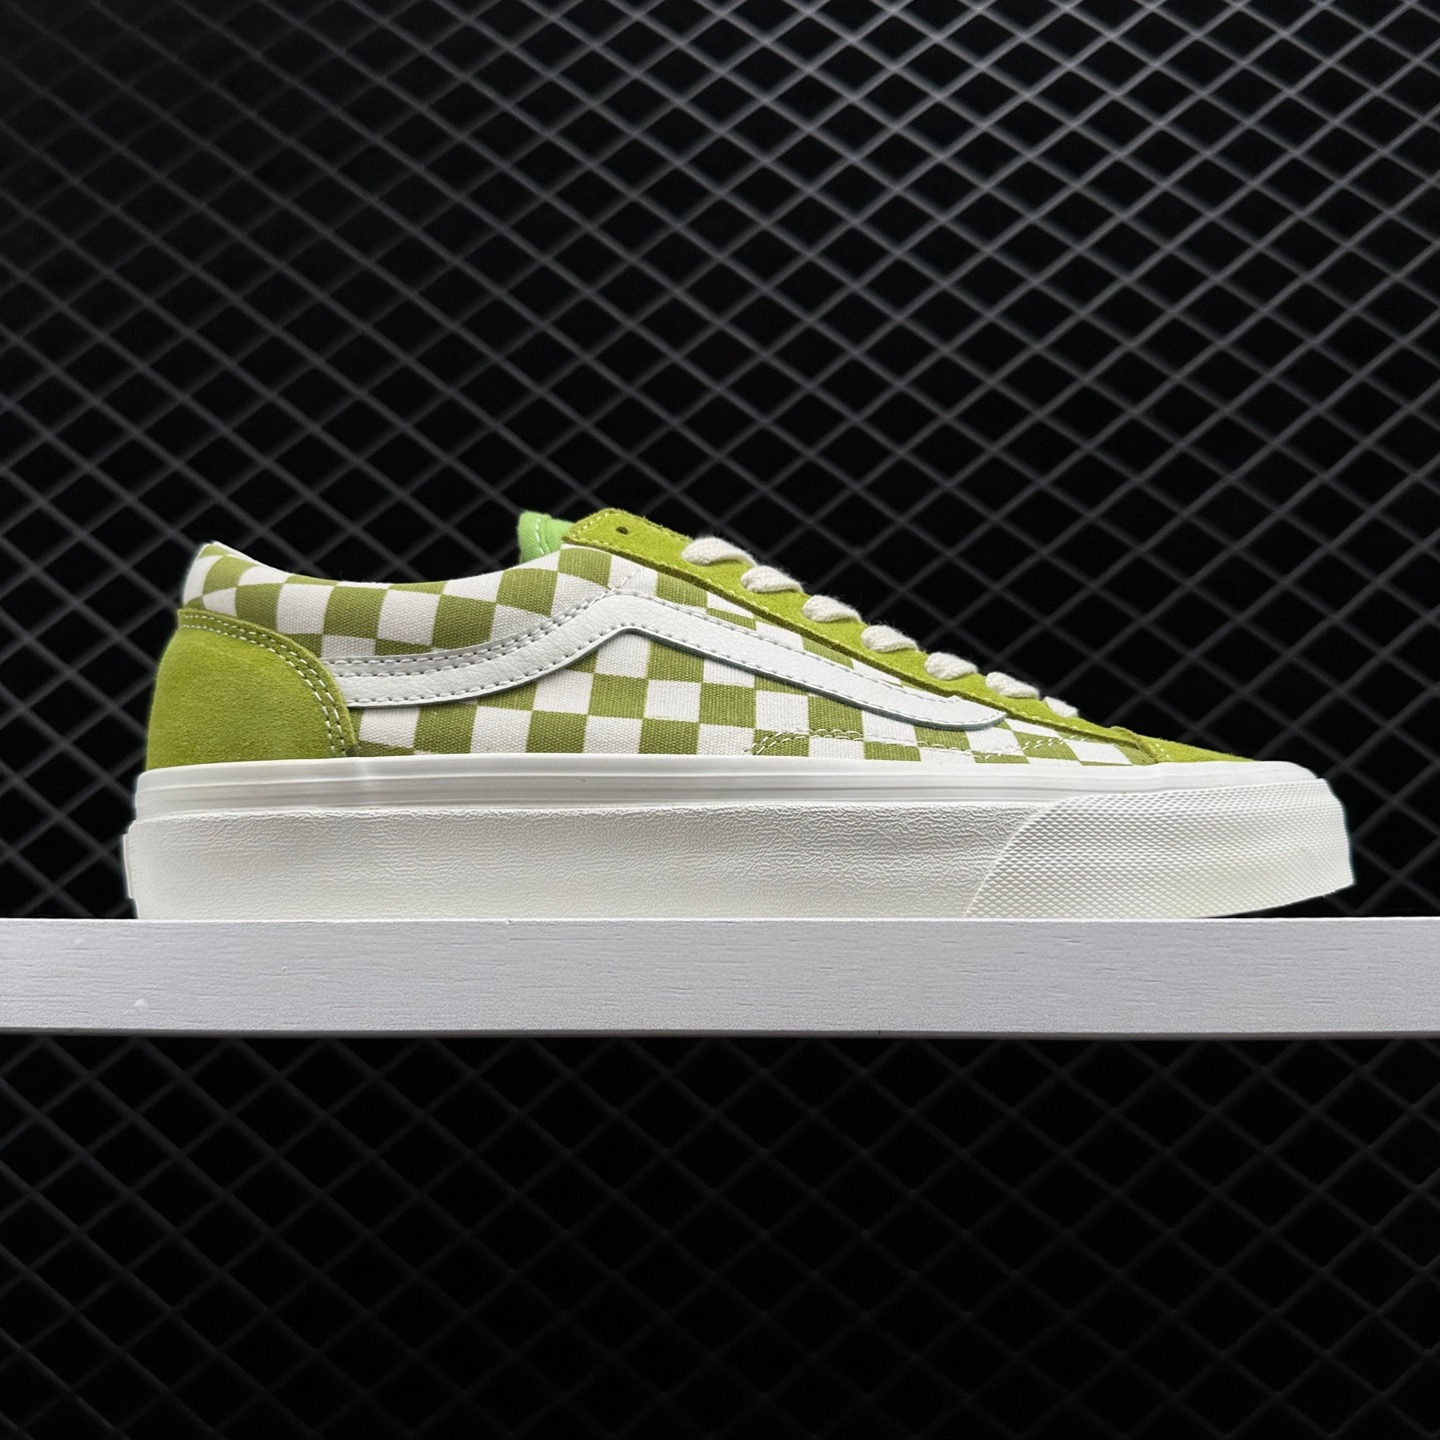 Vans Style 36 'Green' VN0A3DZ3986 - Classic Skate Shoes for Men | Limited Edition